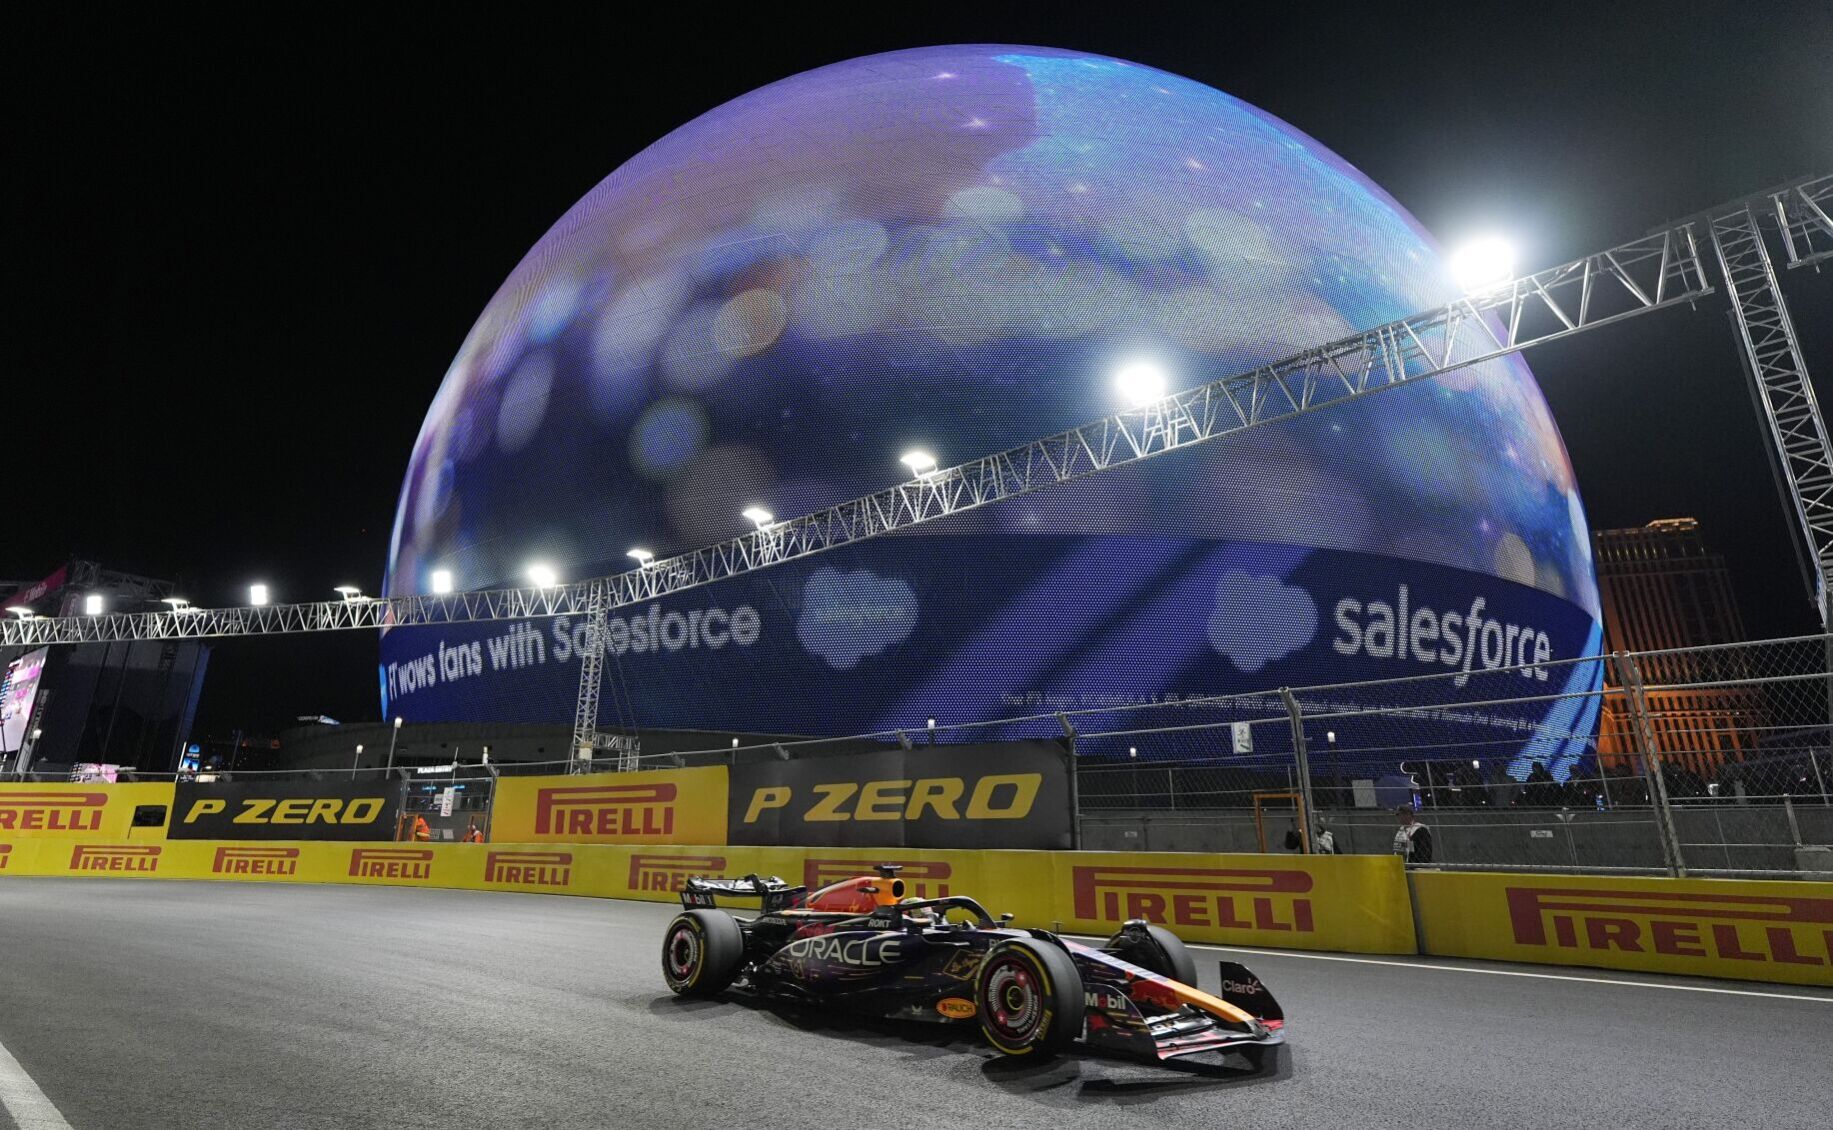 F1 exceeds Las Vegas expectations in highly competitive race